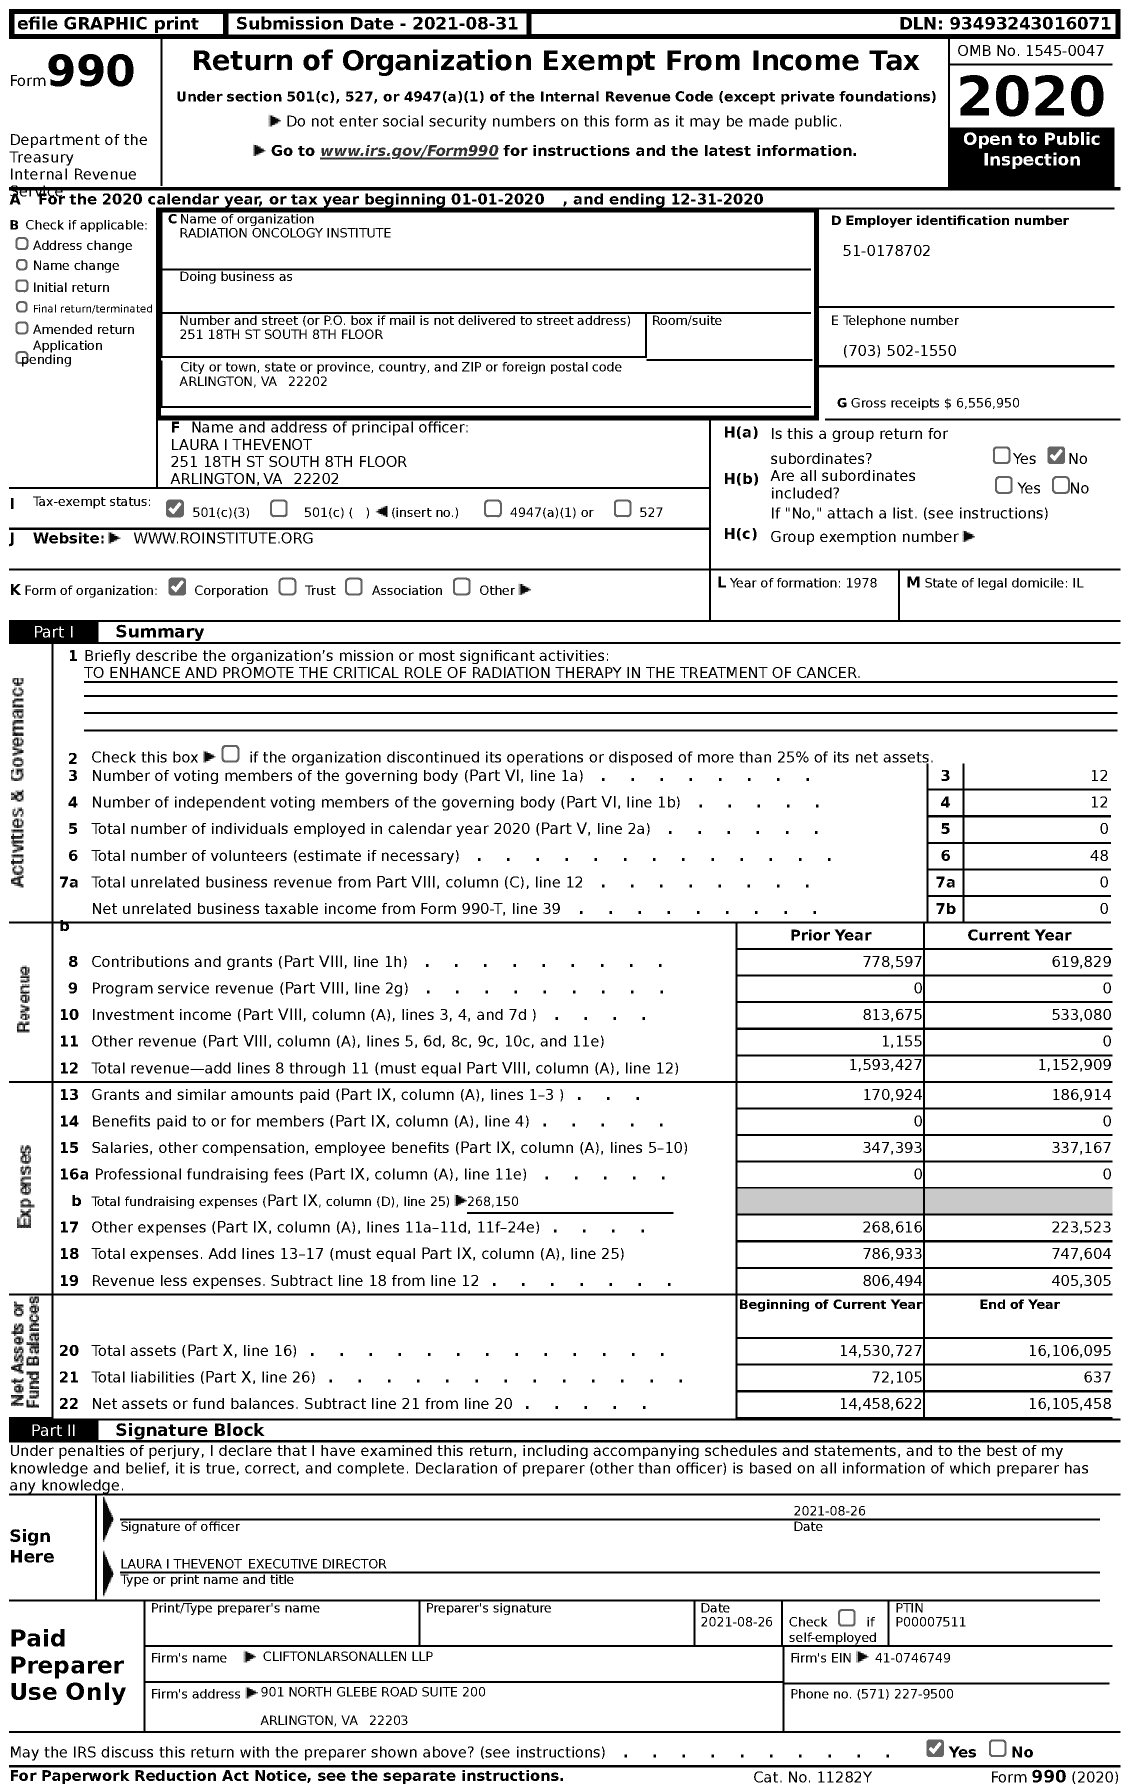 Image of first page of 2020 Form 990 for Radiation Oncology Institute (ROI)